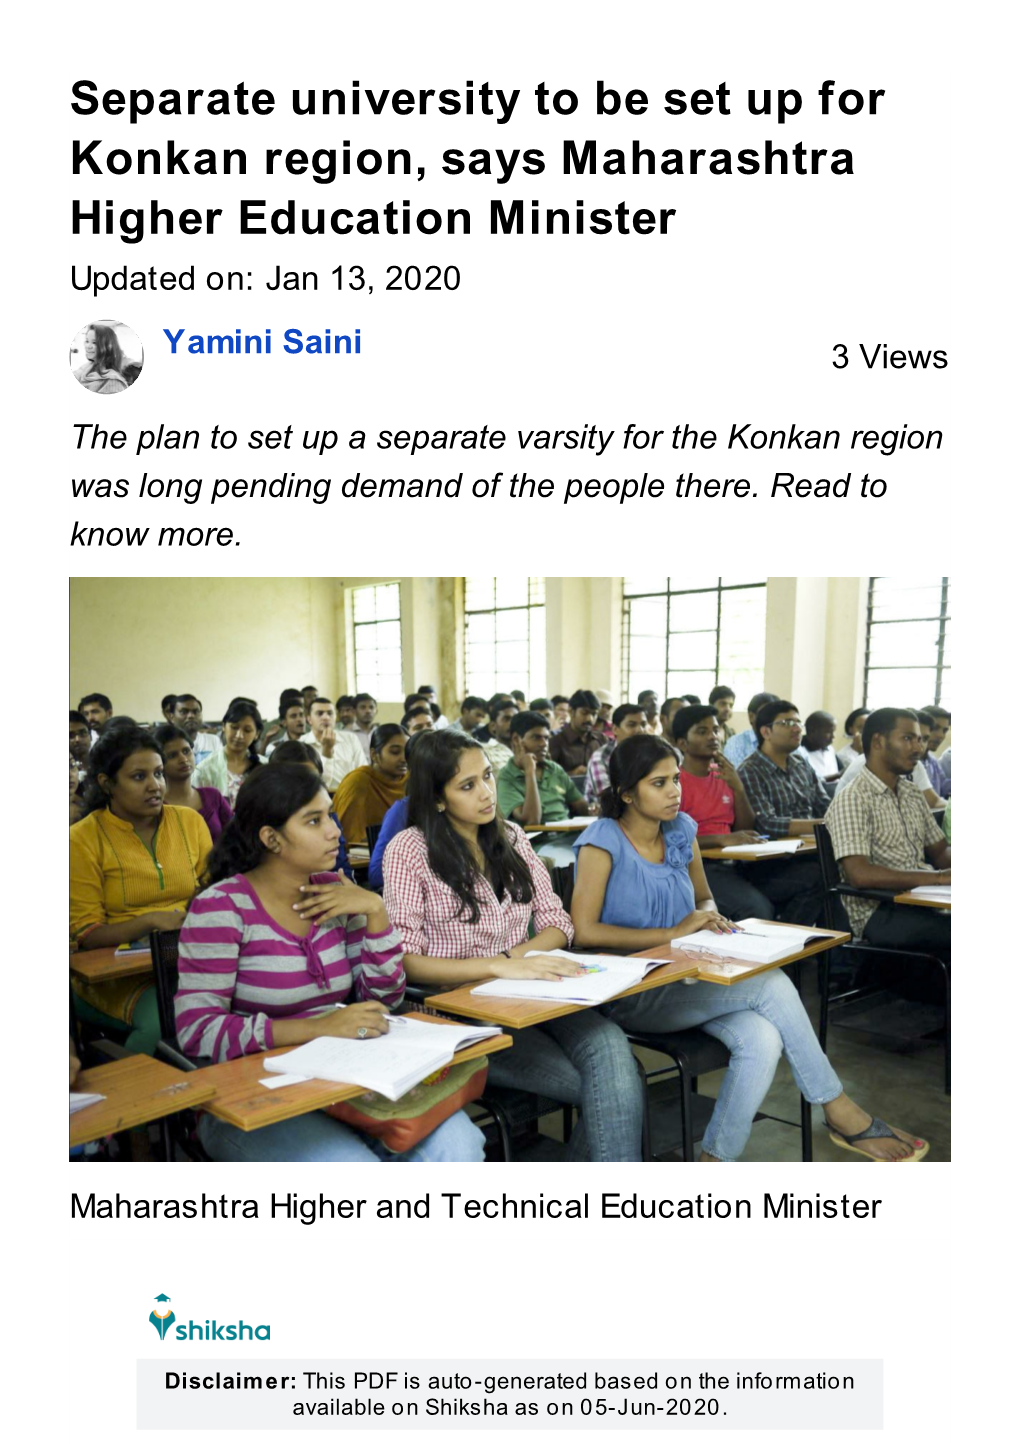 Separate University to Be Set up for Konkan Region, Says Maharashtra Higher Education Minister Updated On: Jan 13, 2020